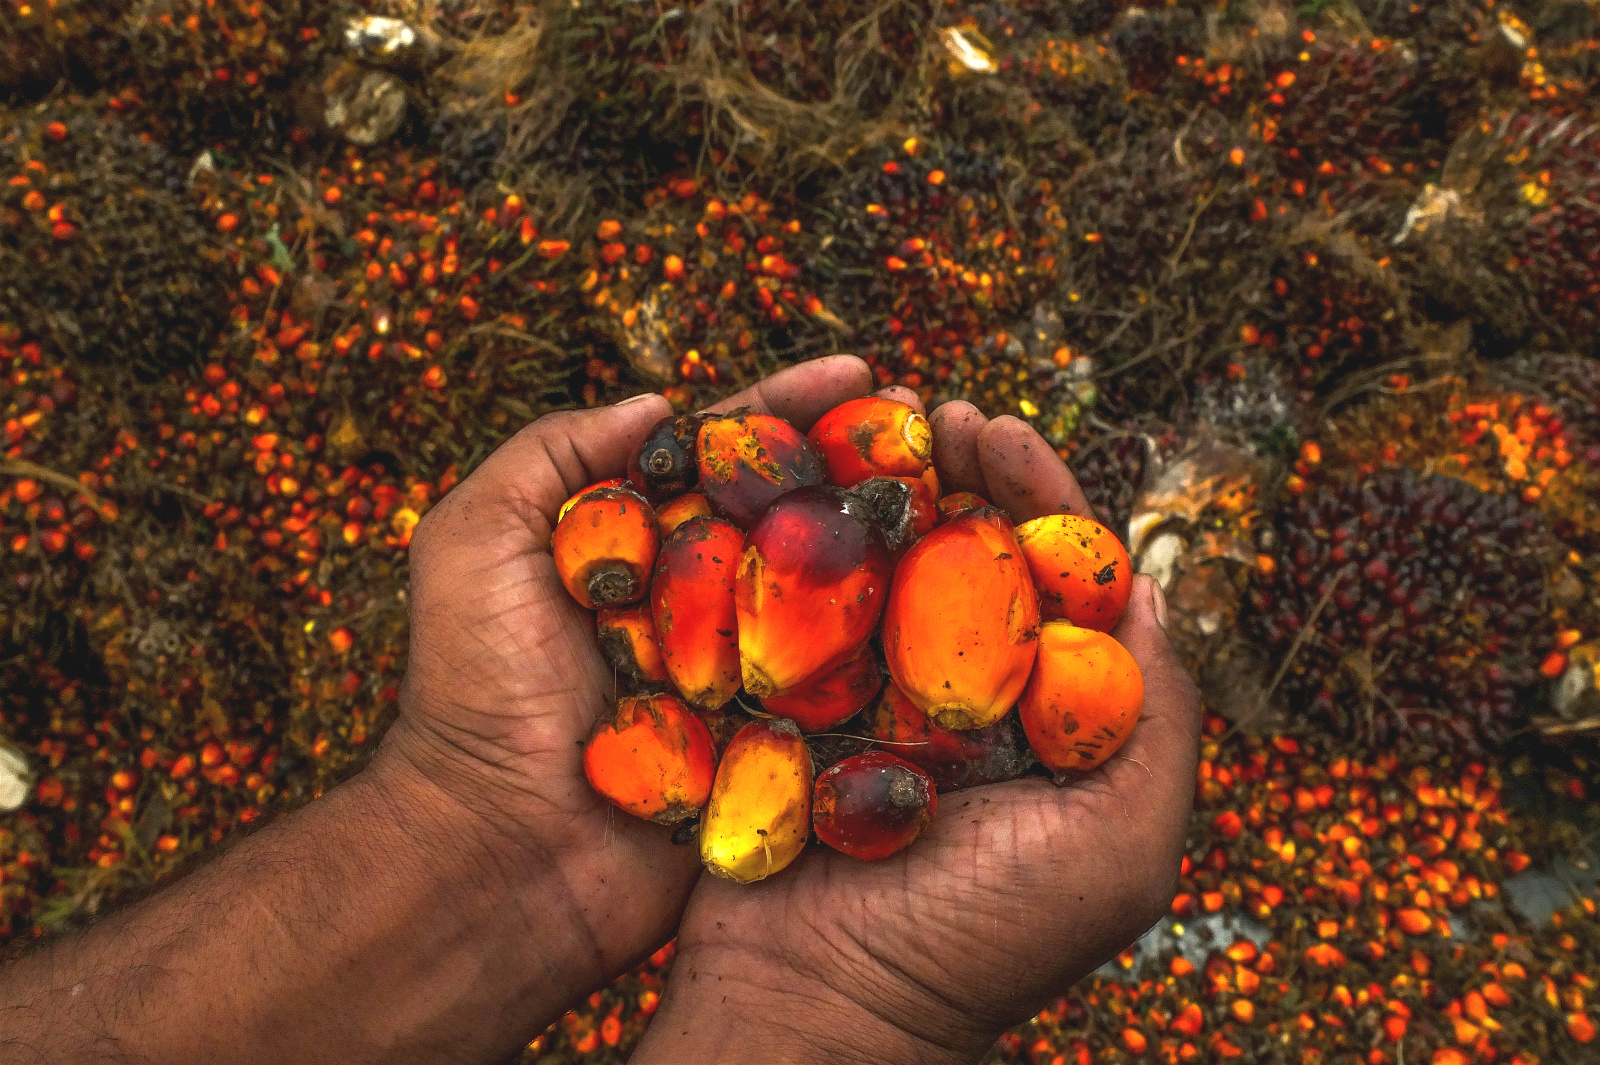 How African palm oil boosts livelihoods and protect forests